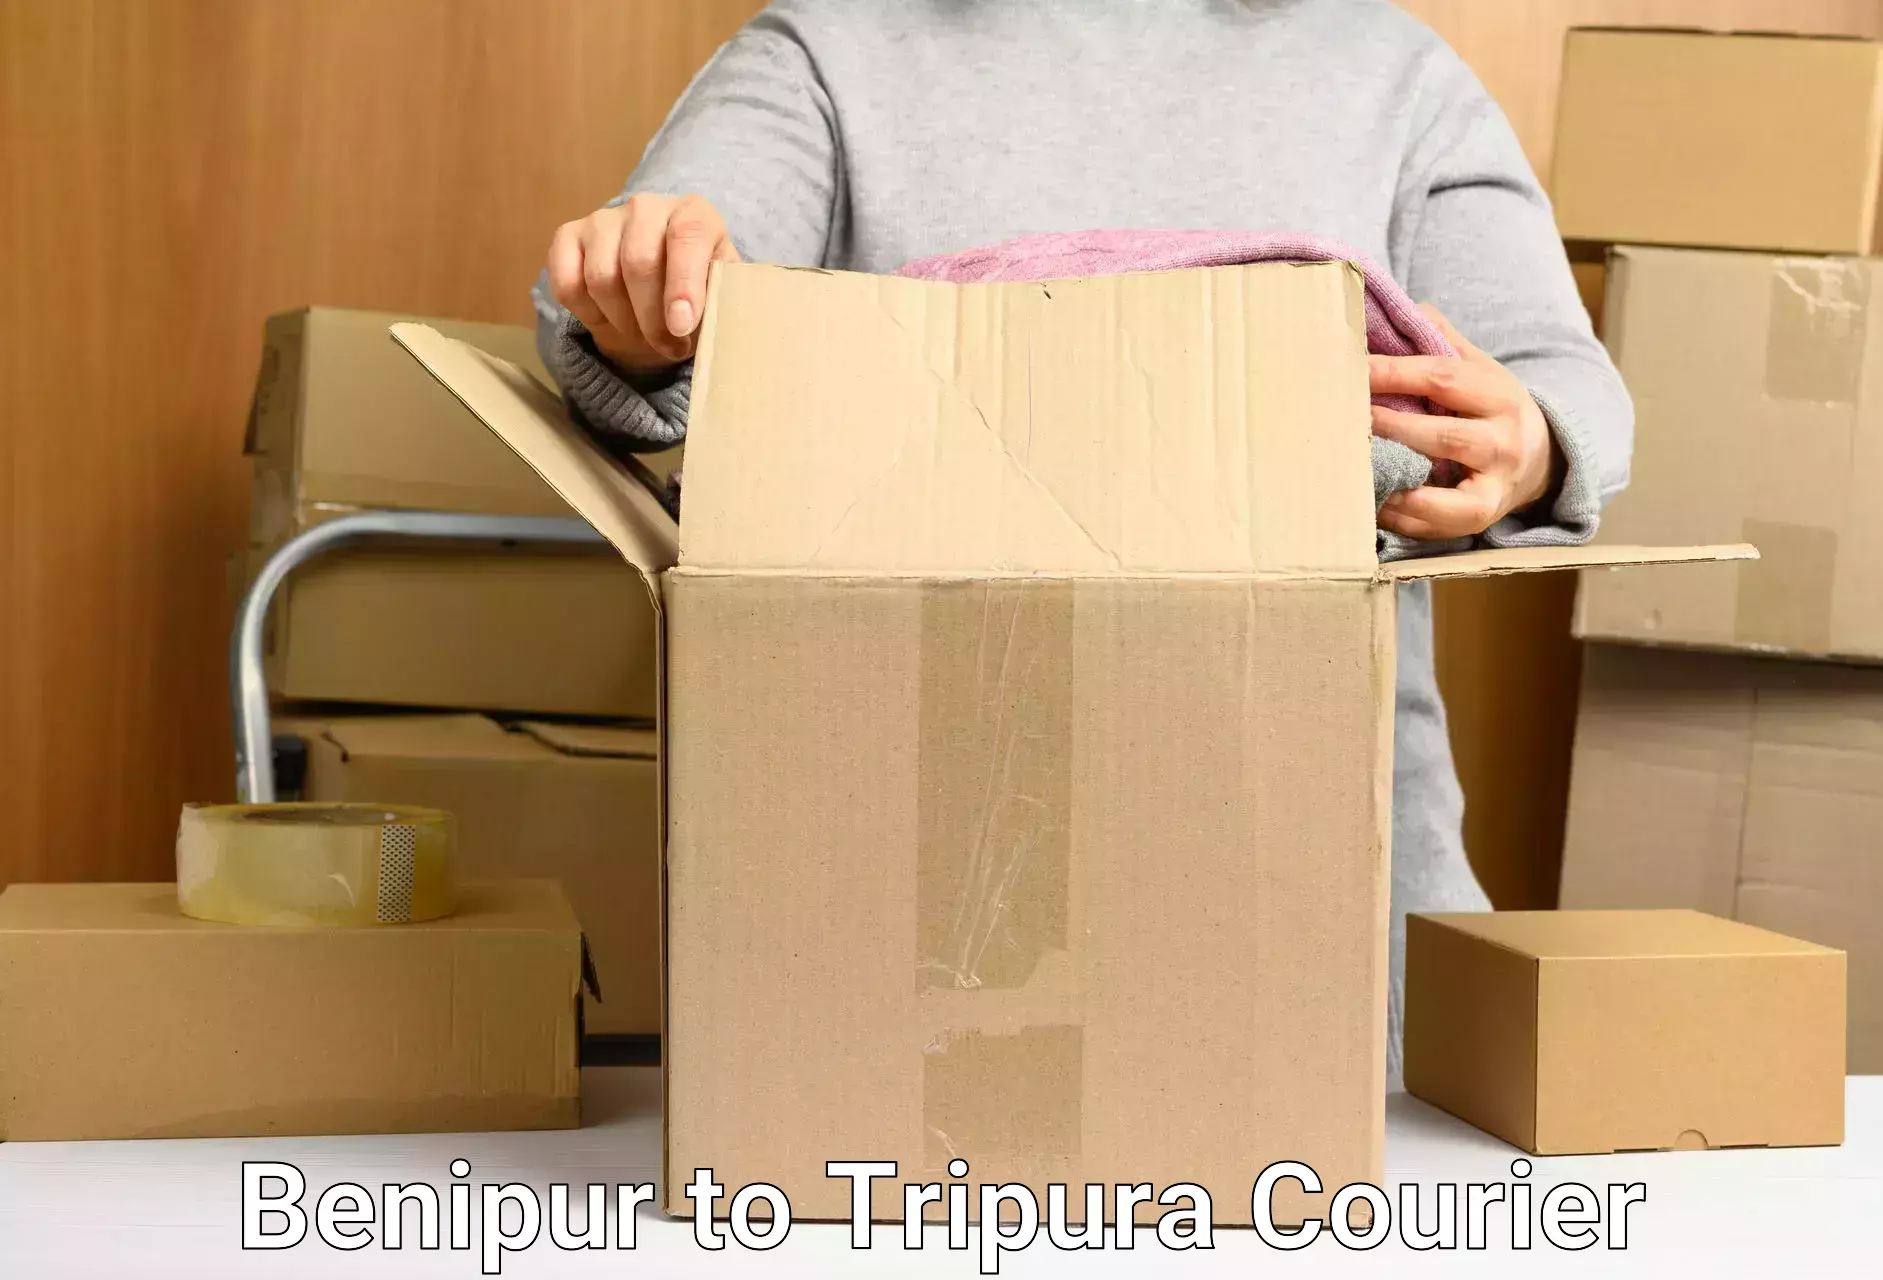 Affordable parcel service in Benipur to Tripura